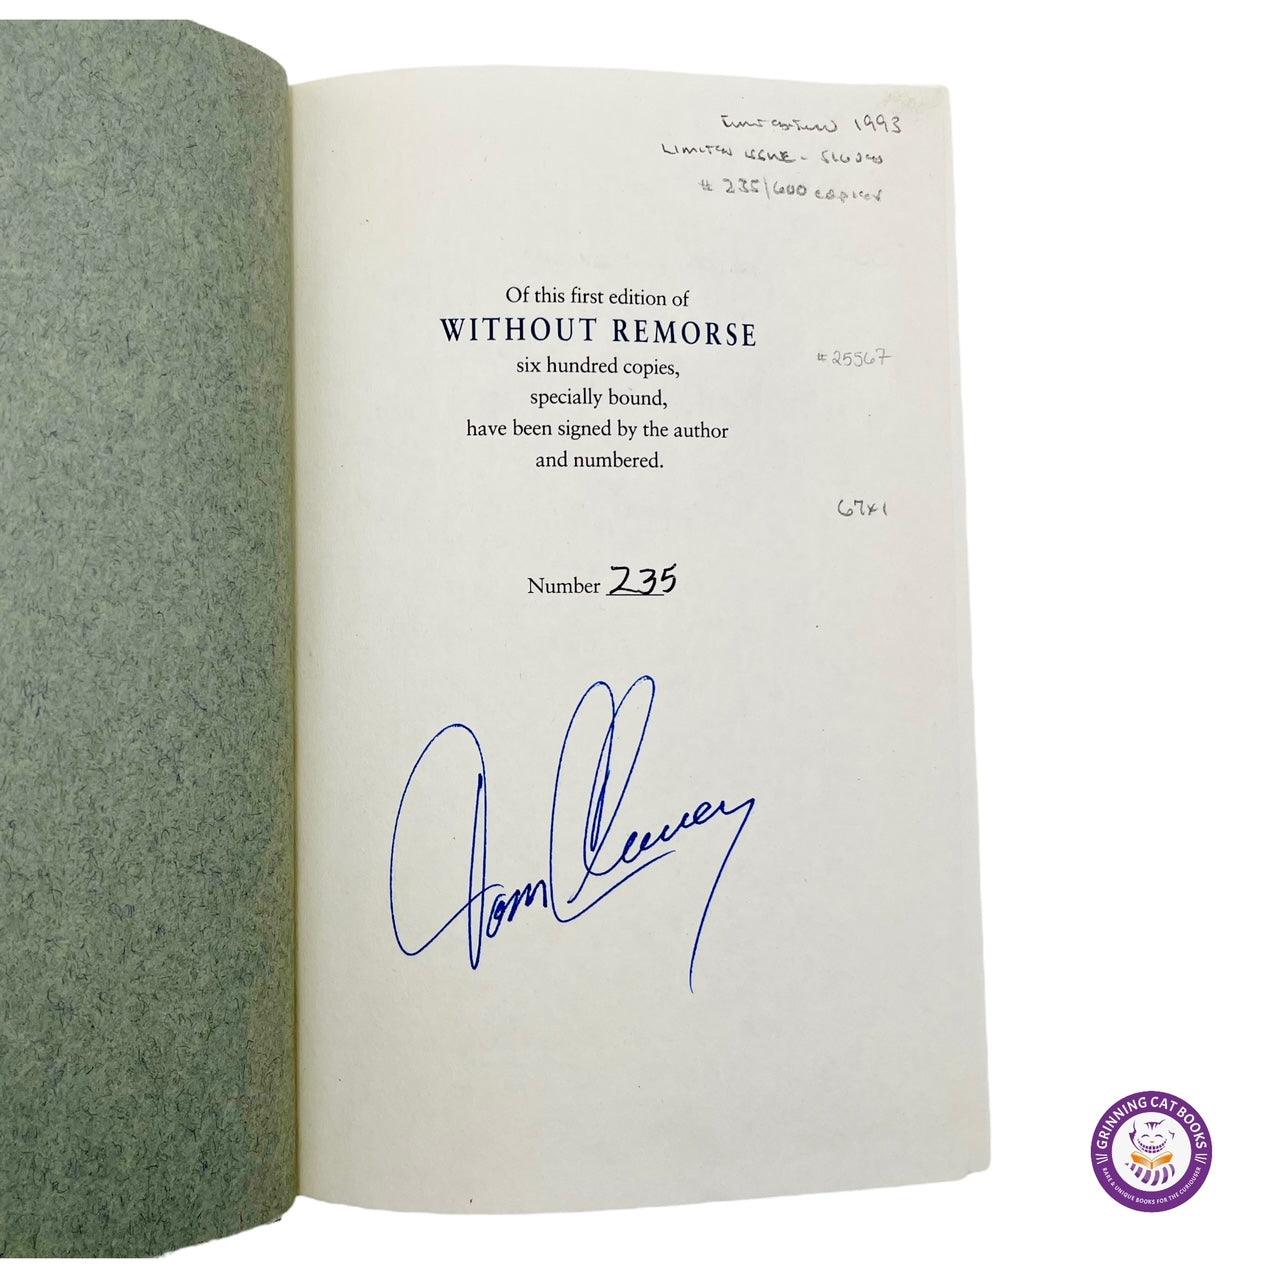 Without Remorse (Limited Edition, signed by Tom Clancy) - Grinning Cat Books - book - AMERICAN LITERATURE, MYSTERY, SIGNED, THRILLER